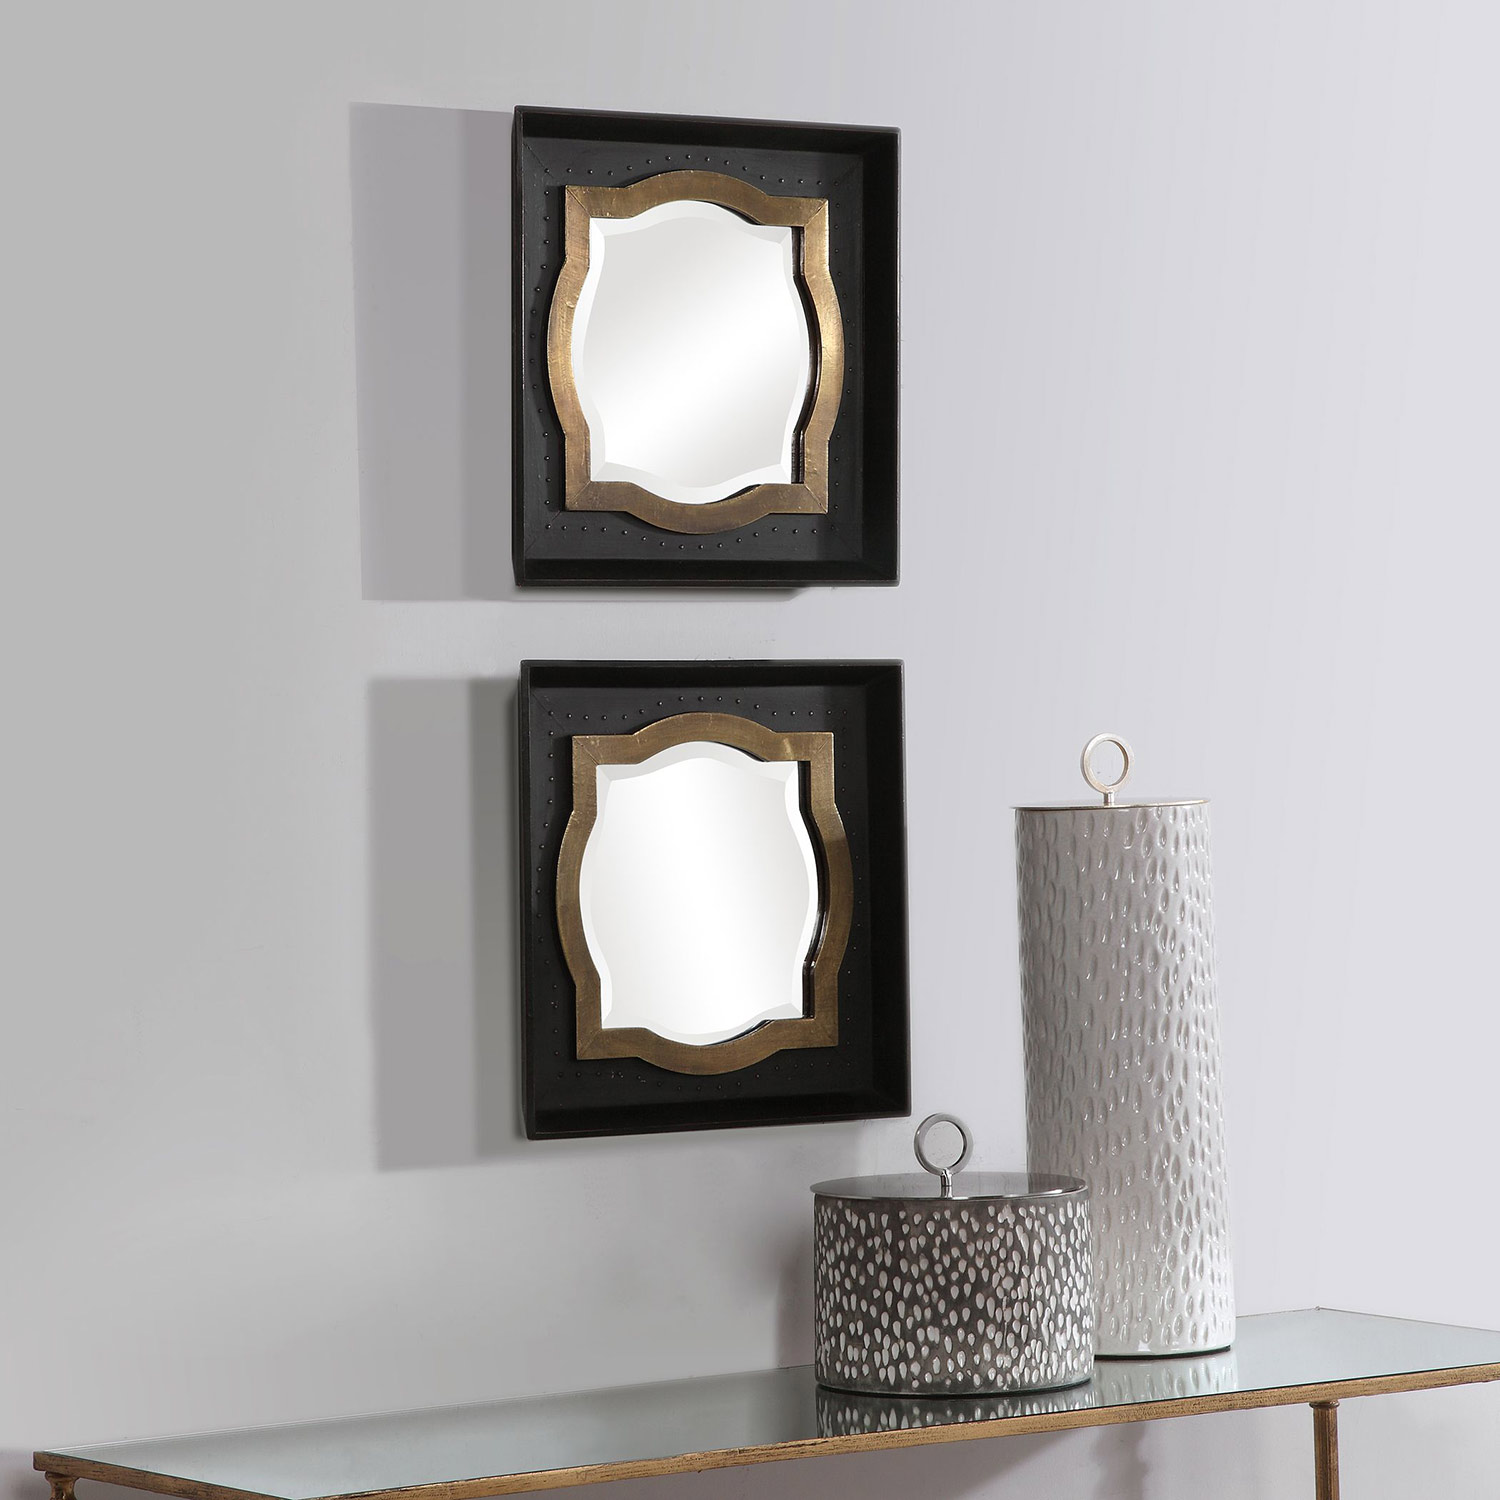 Uttermost Anisah Mirrors - Set of 2 - Moroccan